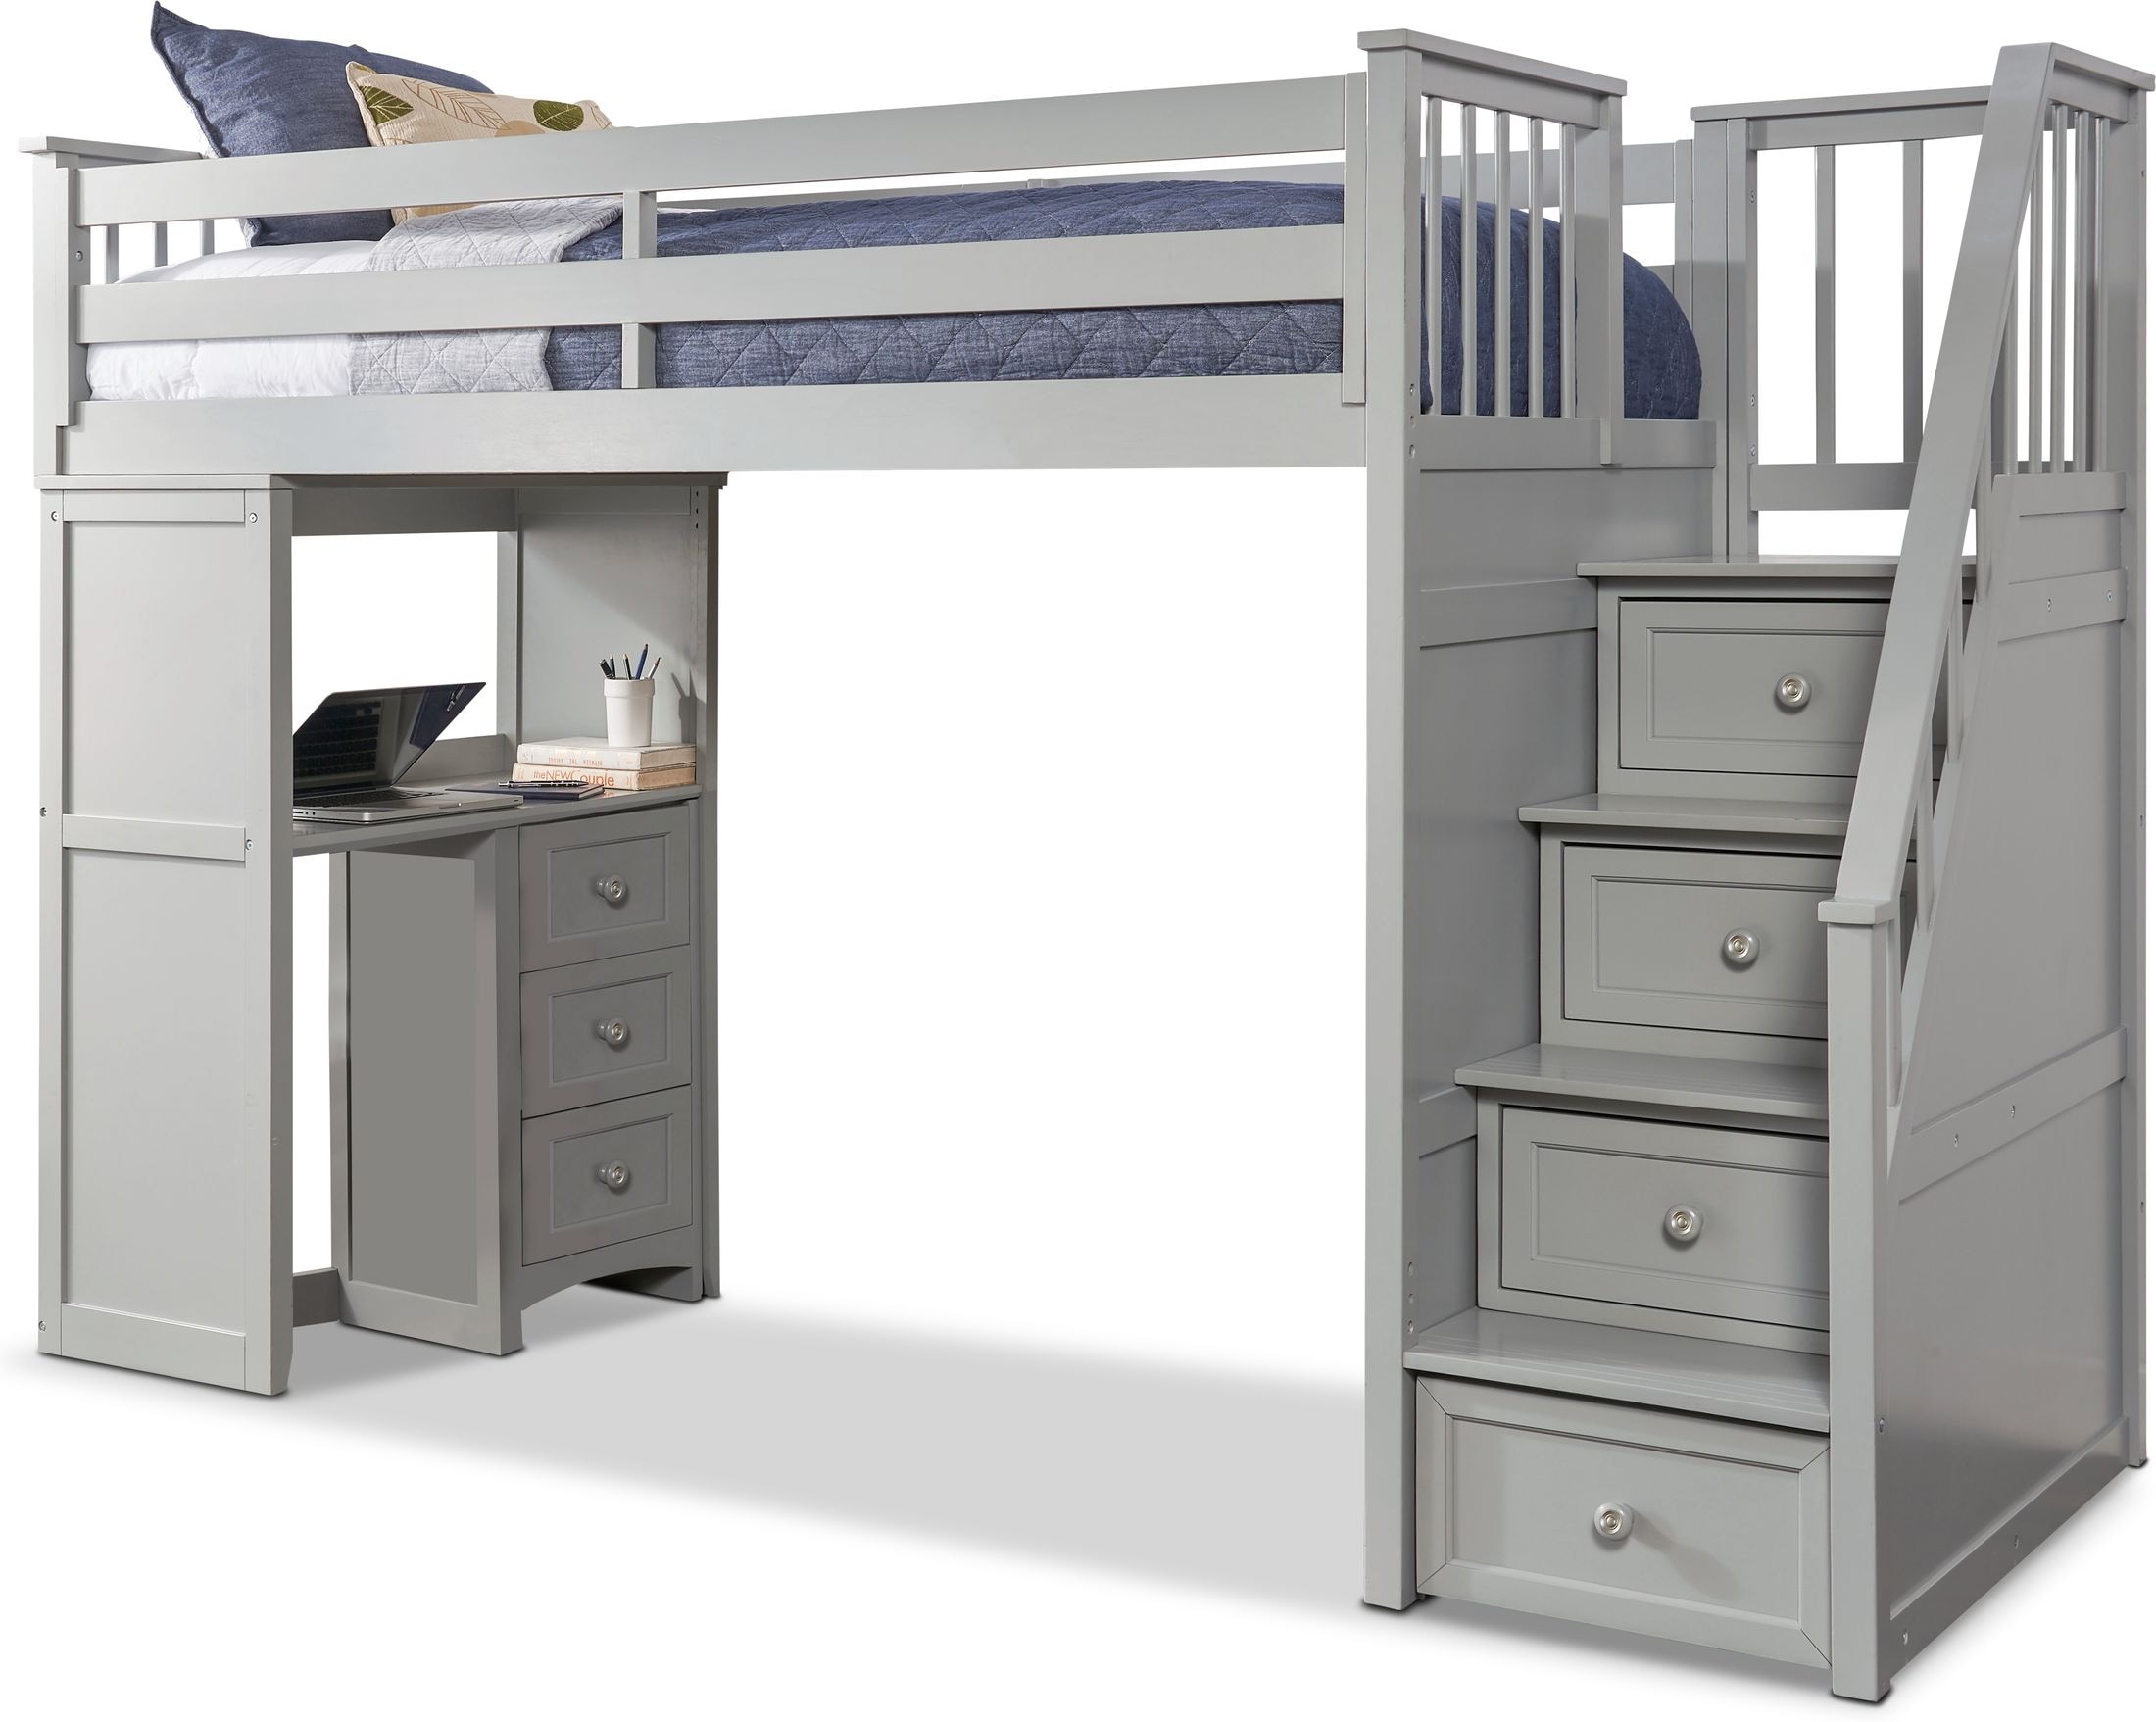 Undefined Value City Furniture, Twin Loft Bed Dimensions